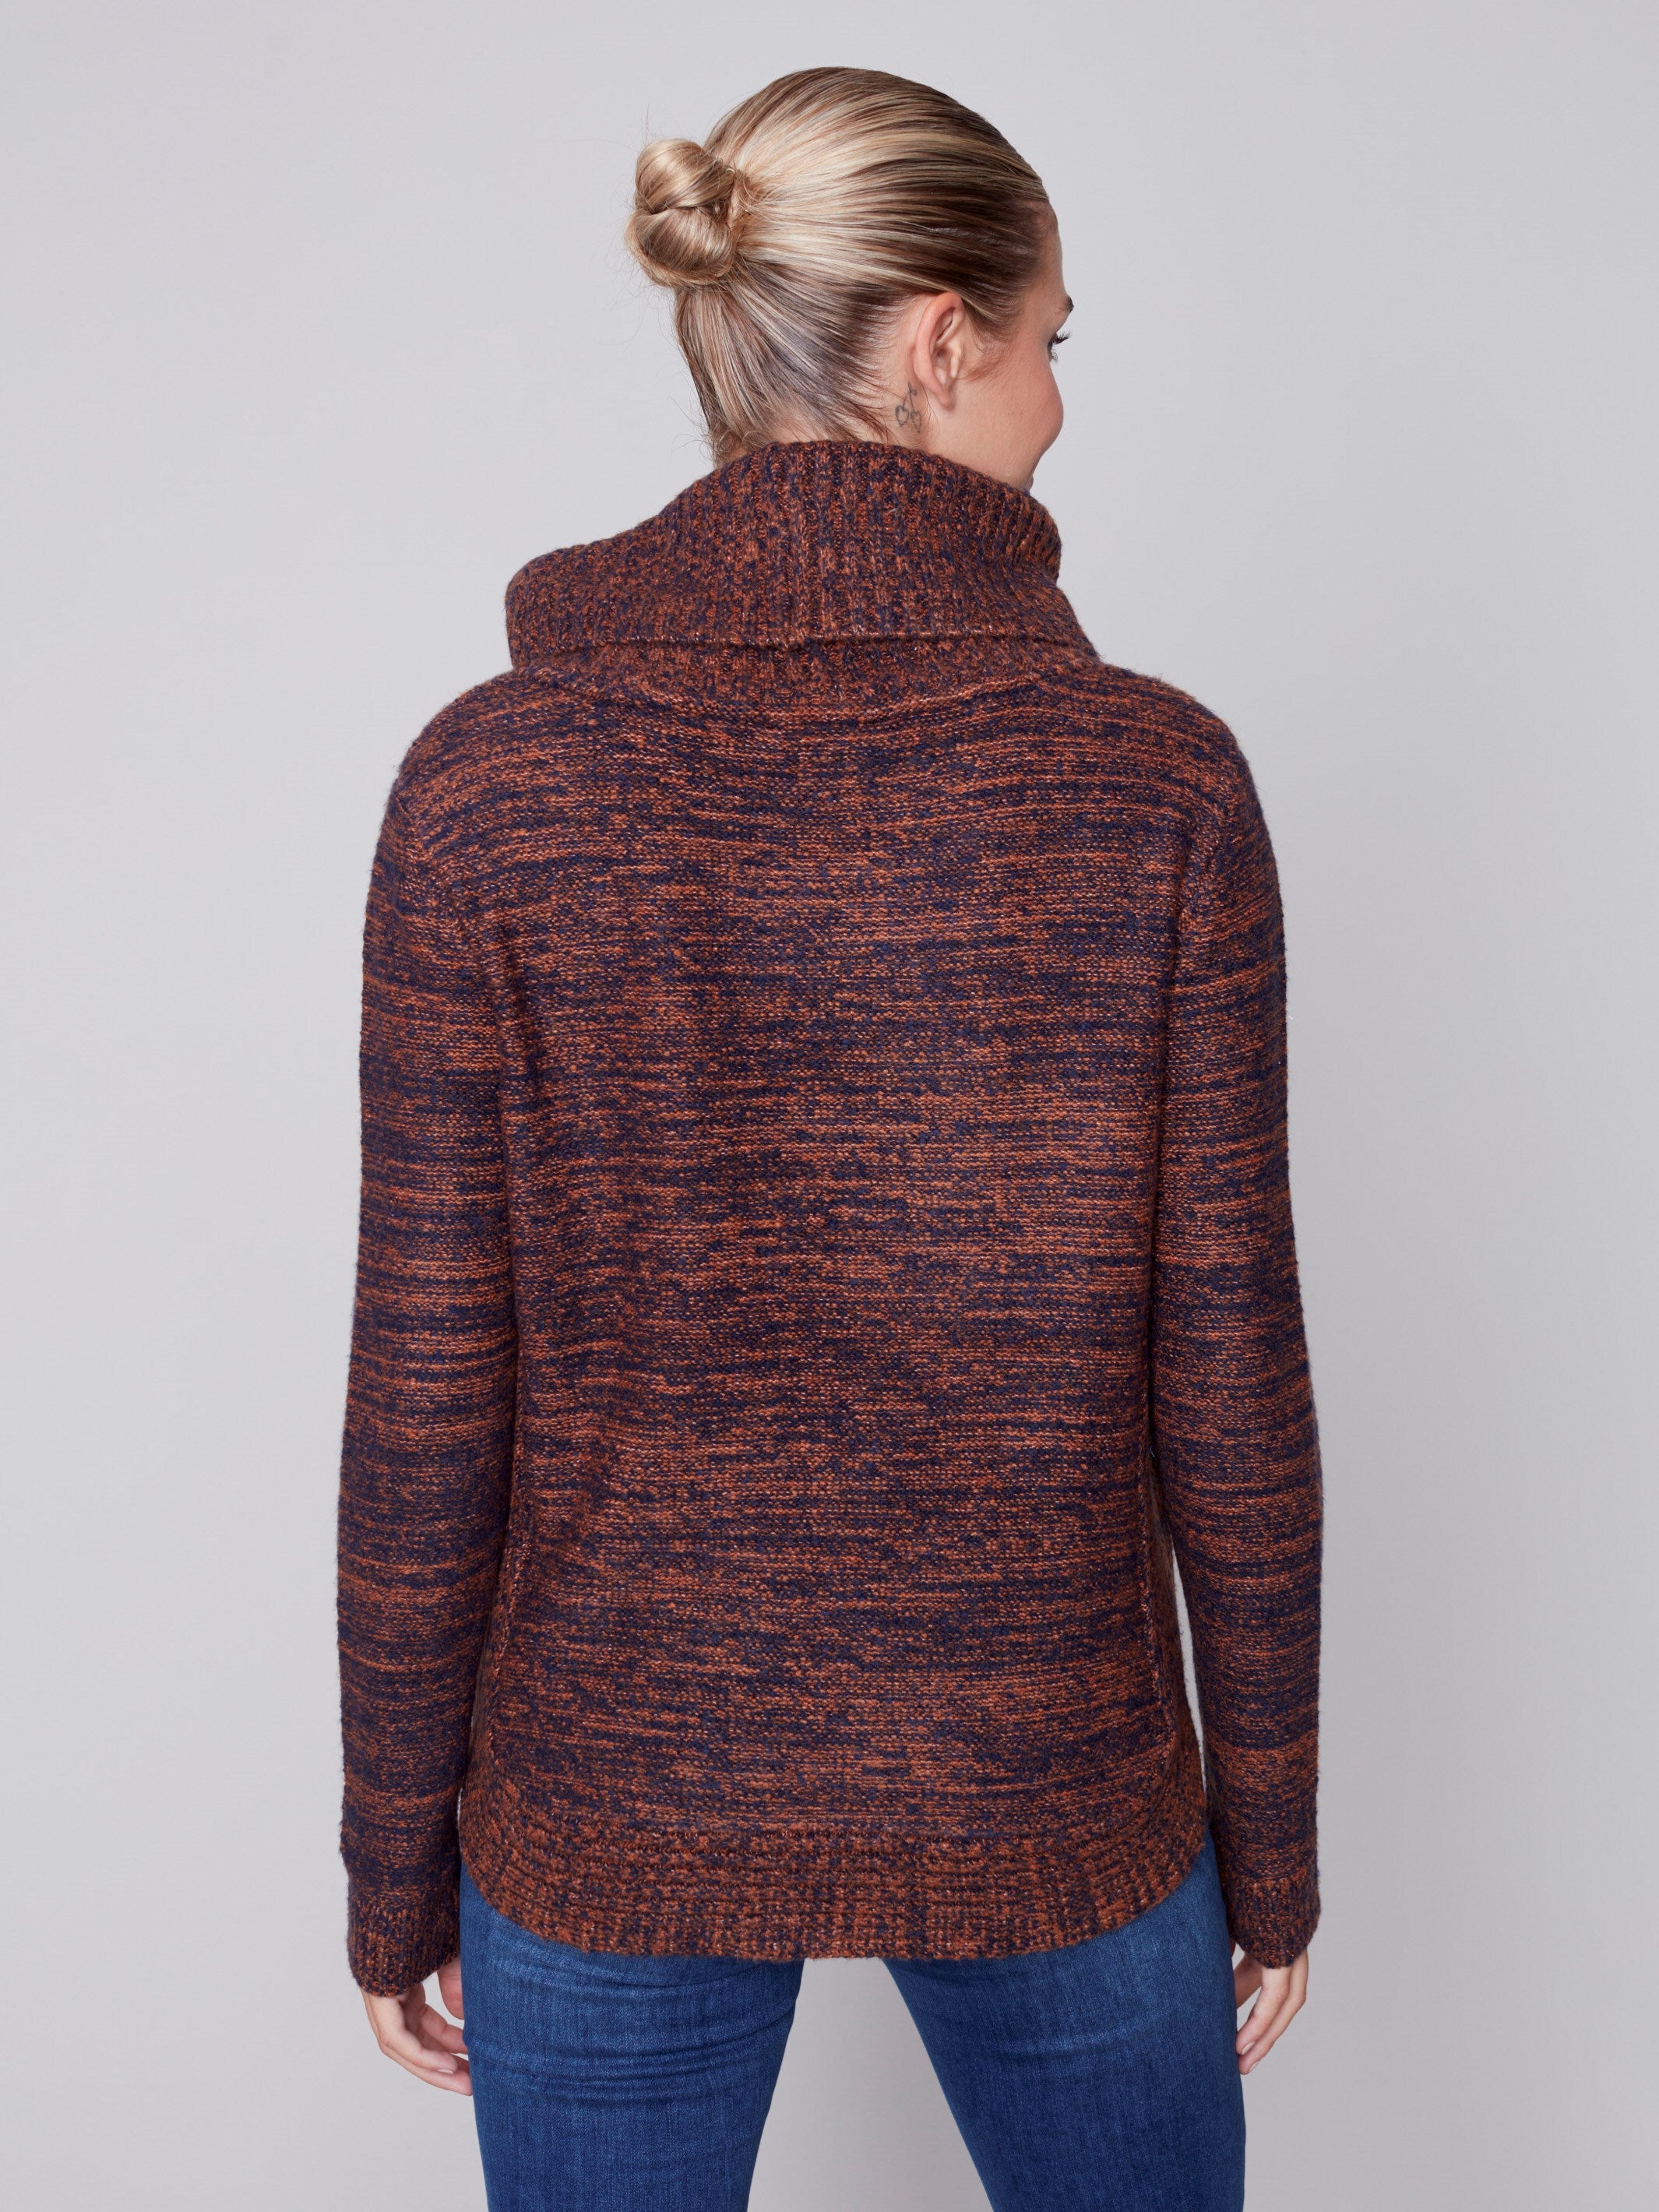 Two-Toned Cable Knit Cowl Neck Sweater - Cinnamon